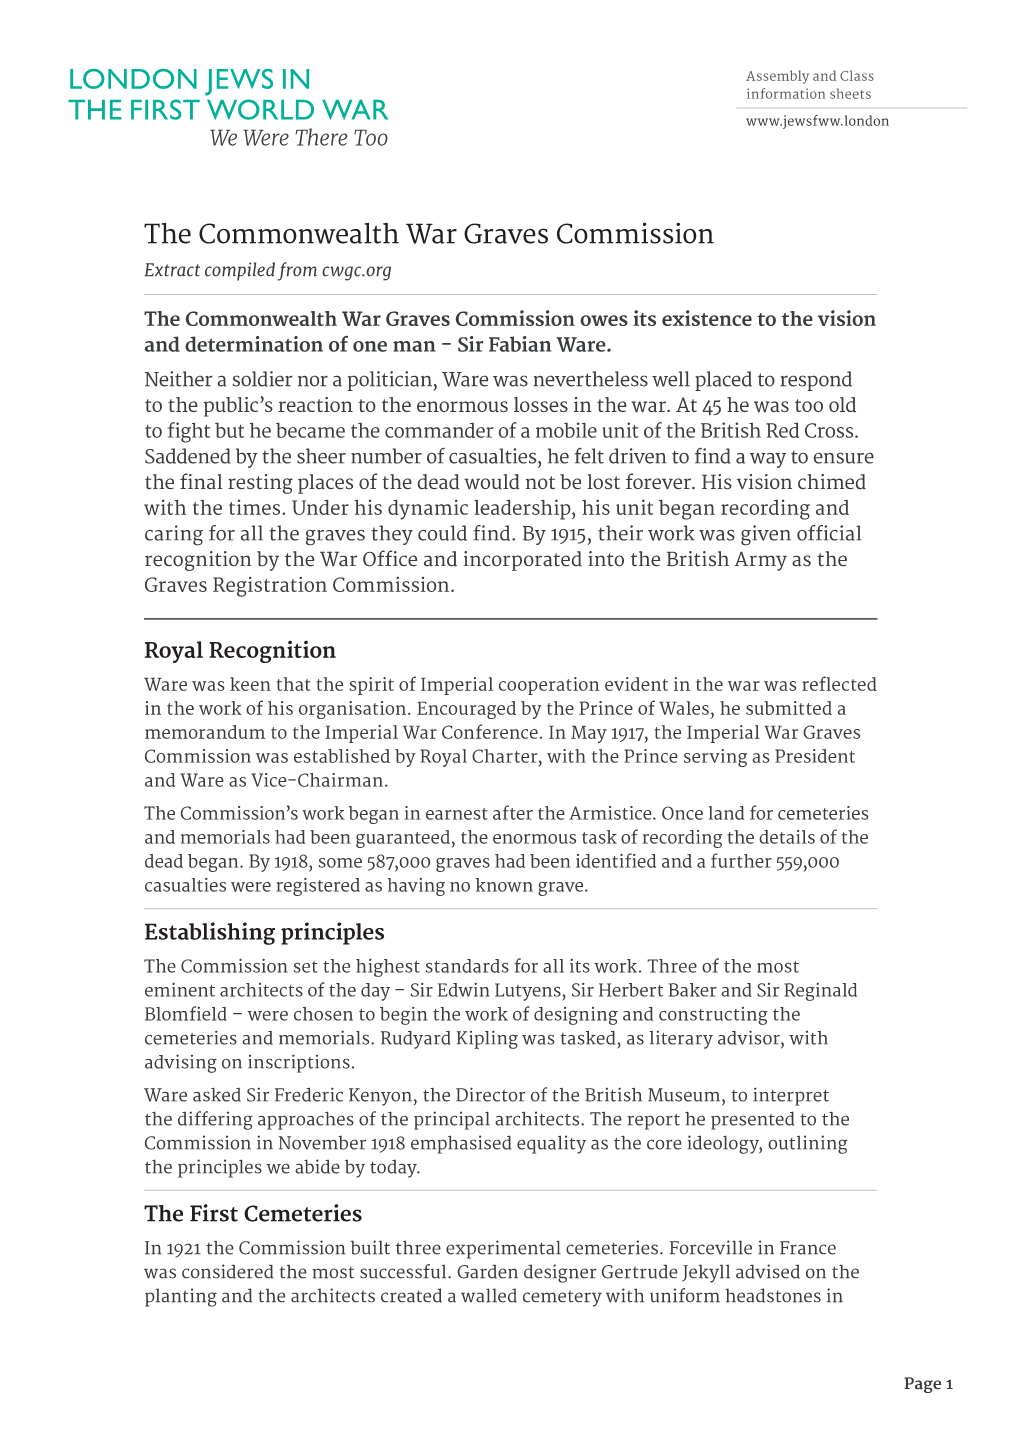 The Commonwealth War Graves Commission Extract Compiled from Cwgc.Org